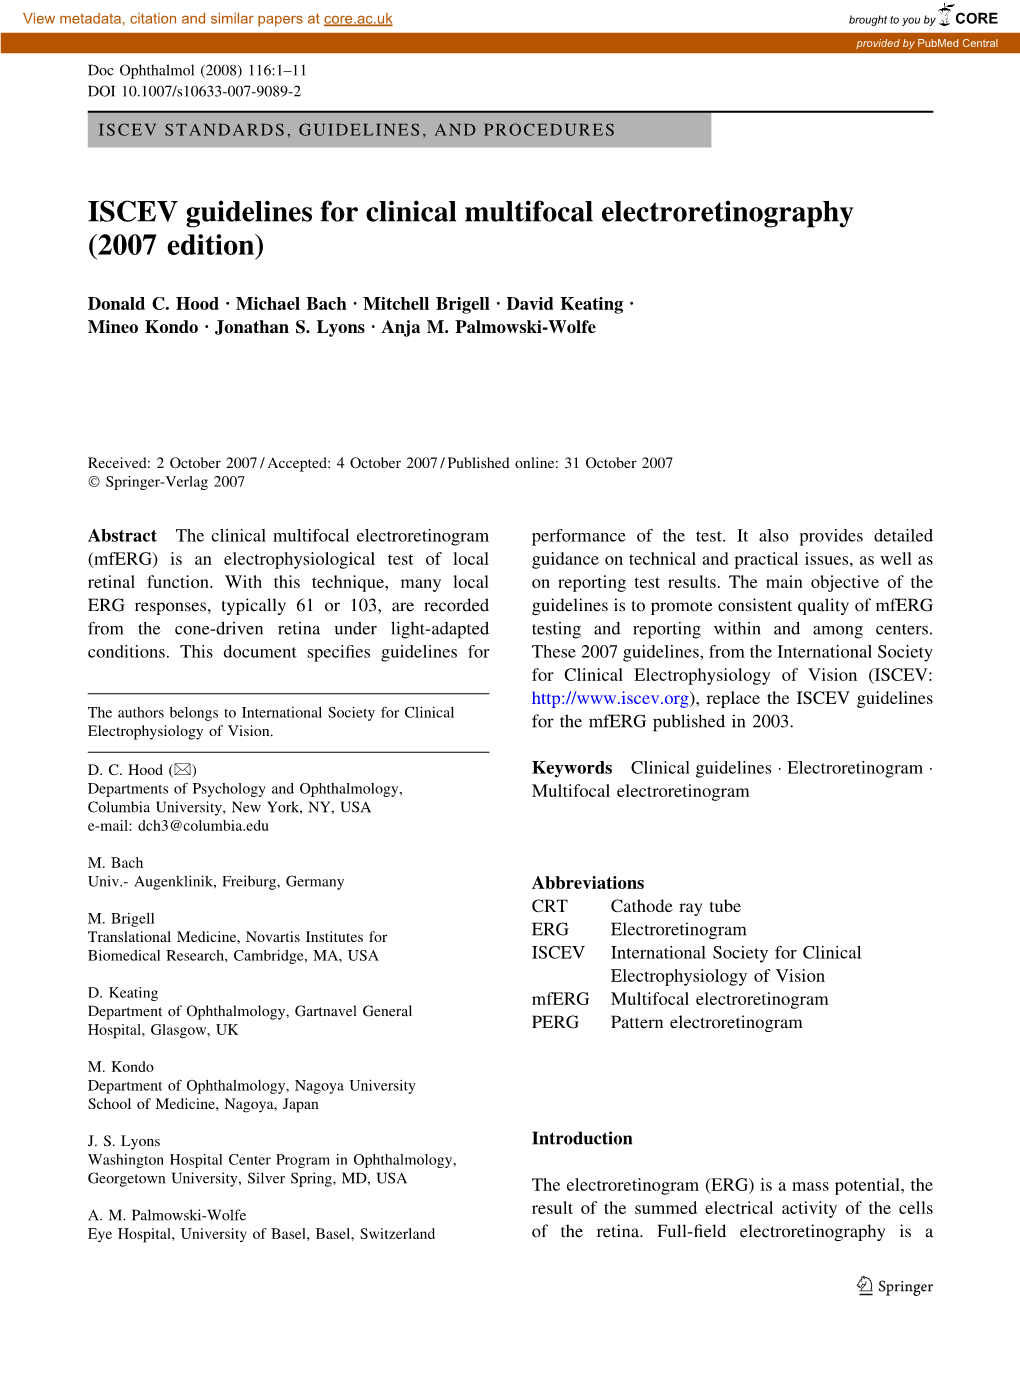 ISCEV Guidelines for Clinical Multifocal Electroretinography (2007 Edition)